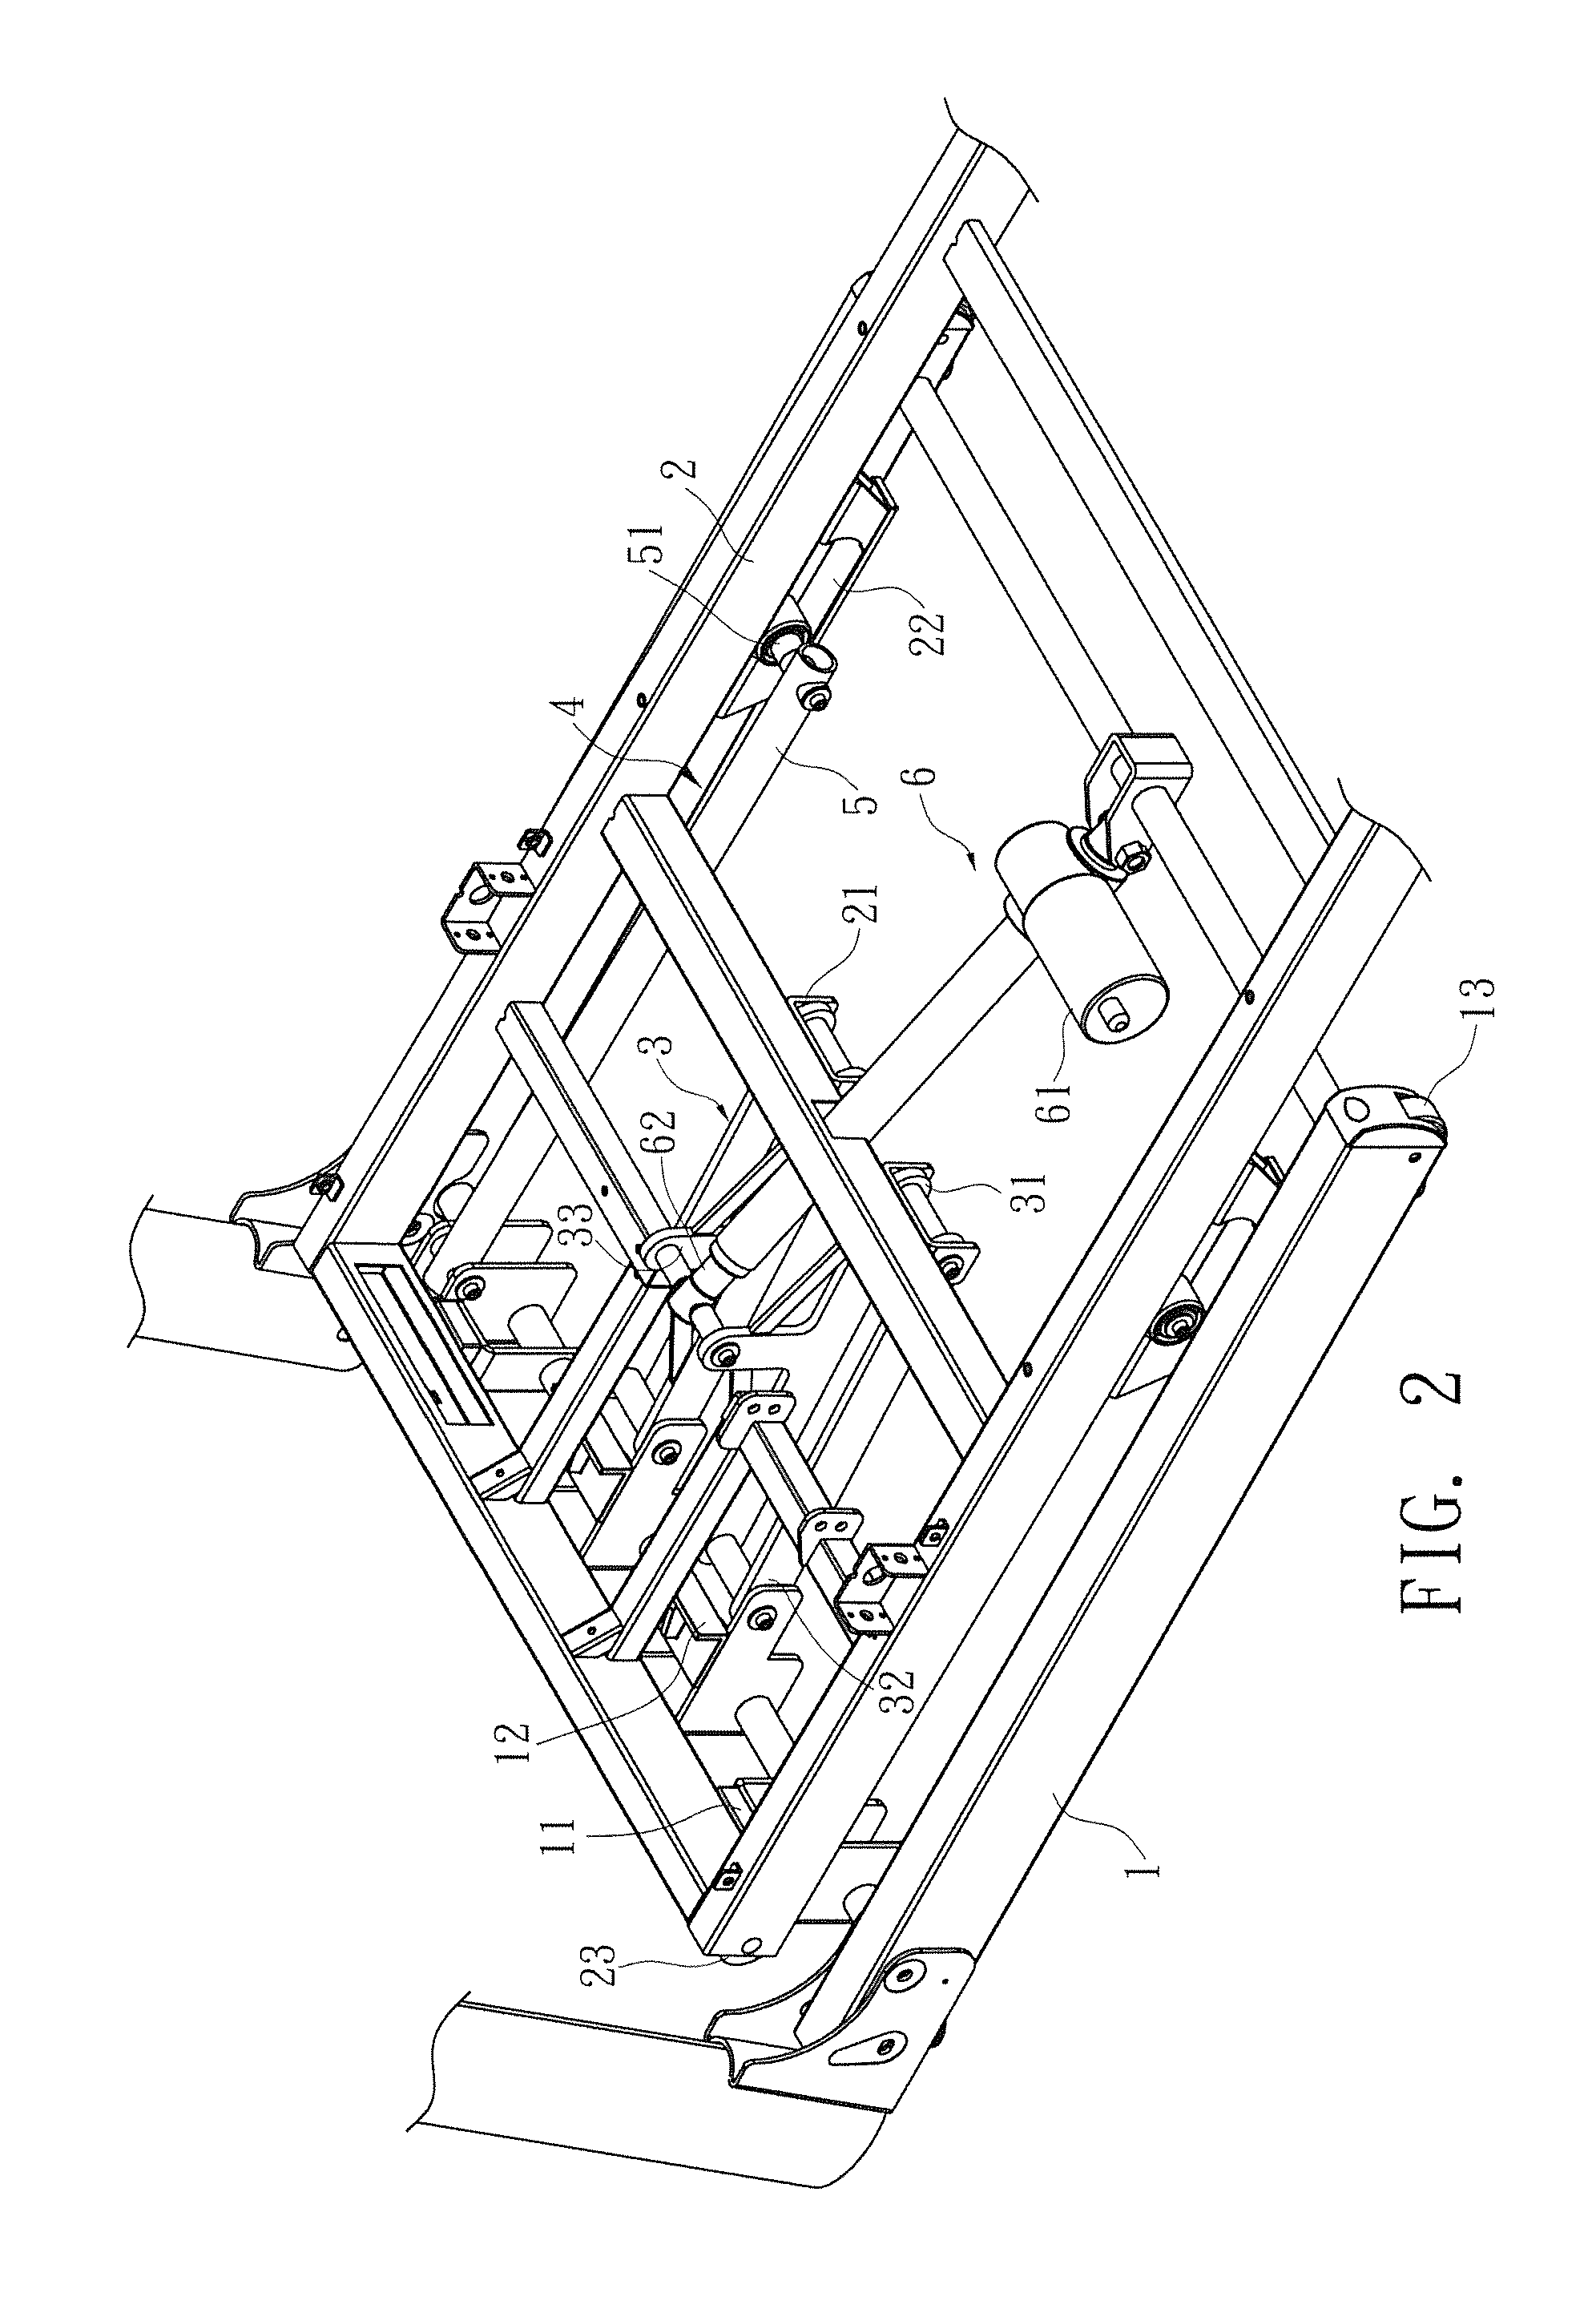 Tilting and folding device for a treadmill